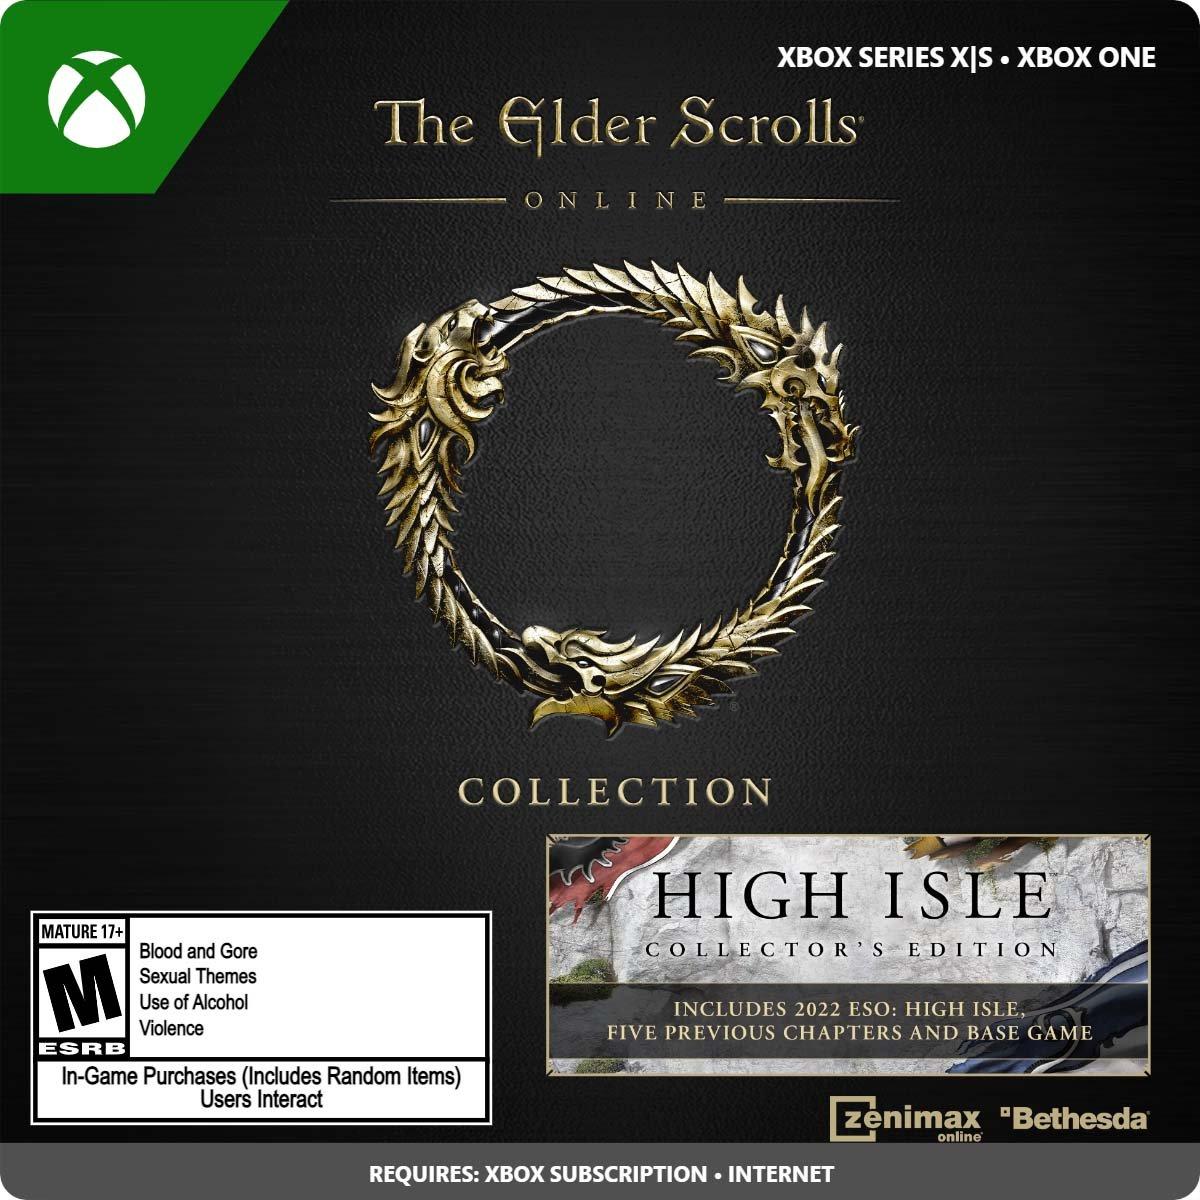 The Elder Scrolls Online Collection: High Isle Collector's